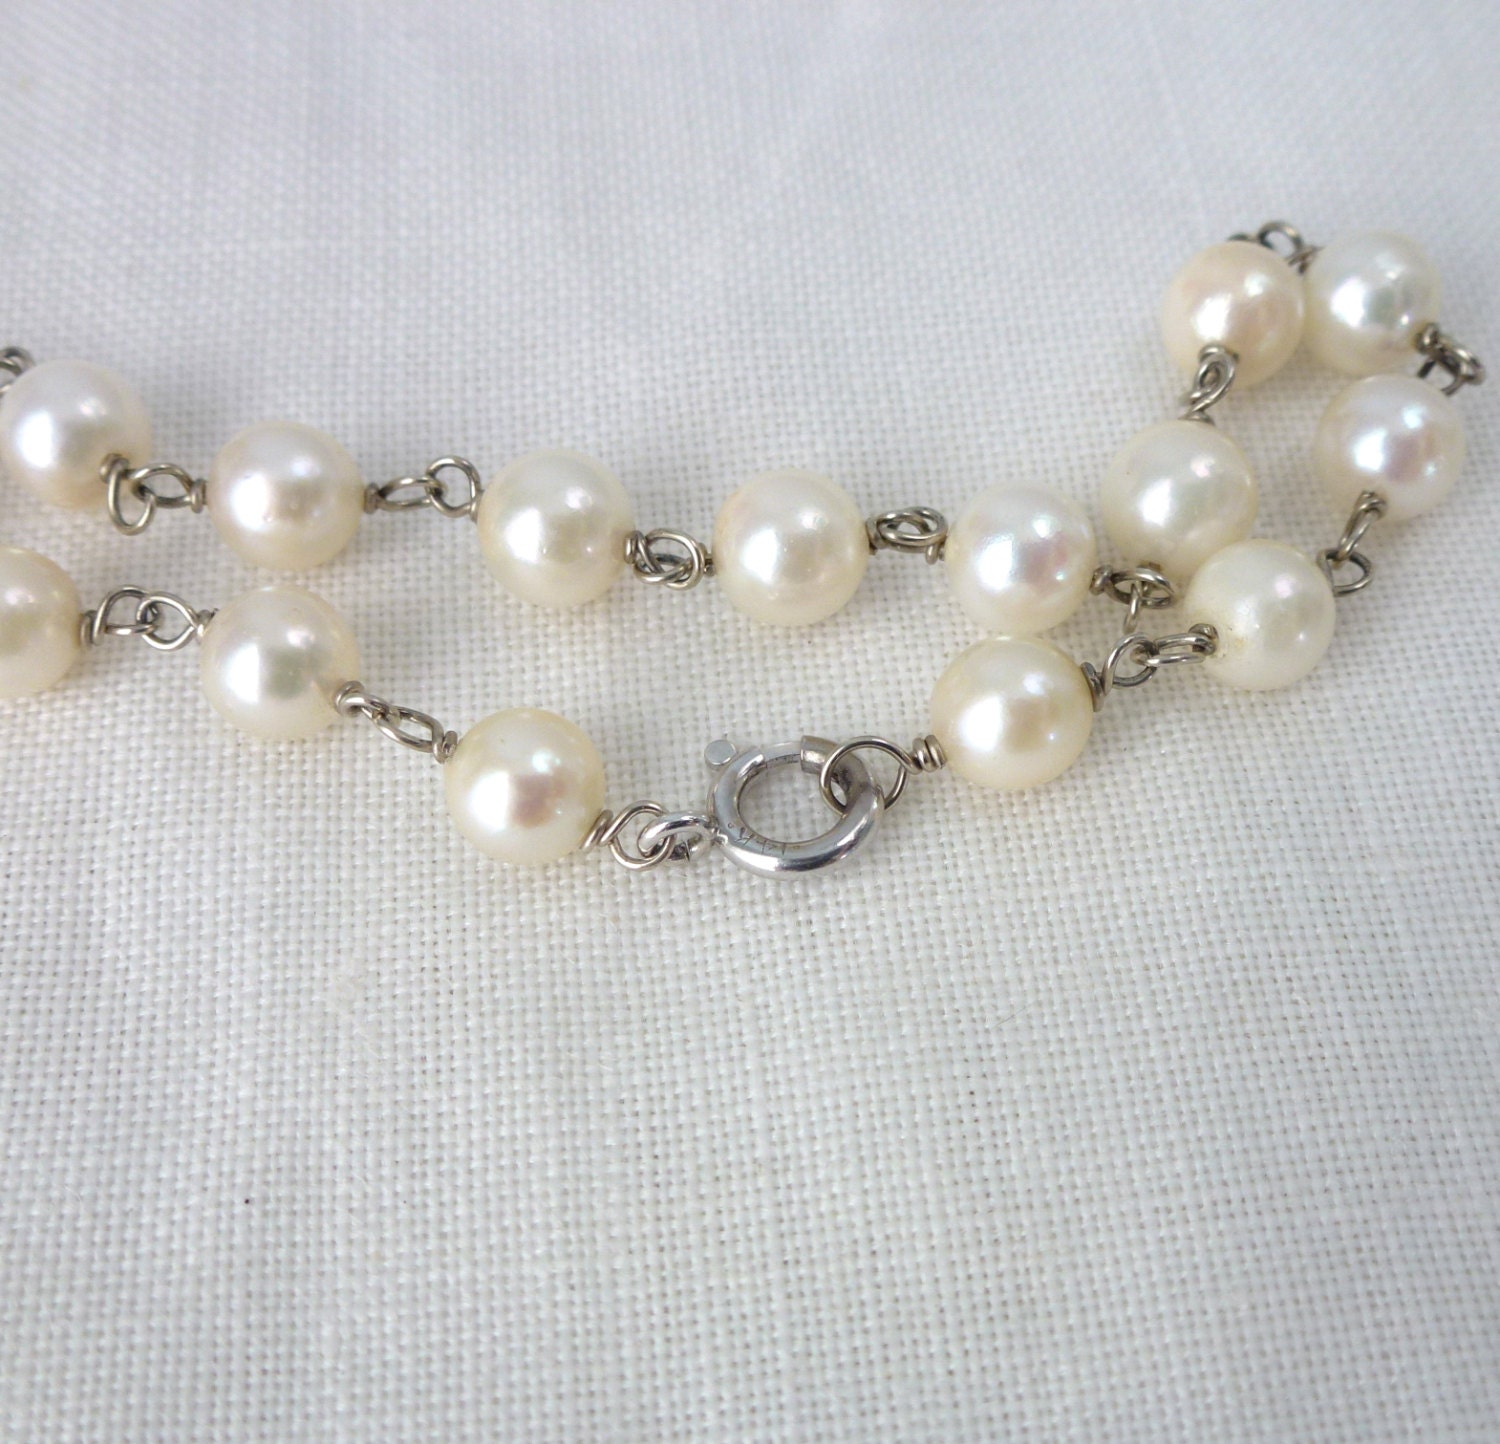 A Vintage Cultured Pearl Bracelet with by RomanceVintageJewels